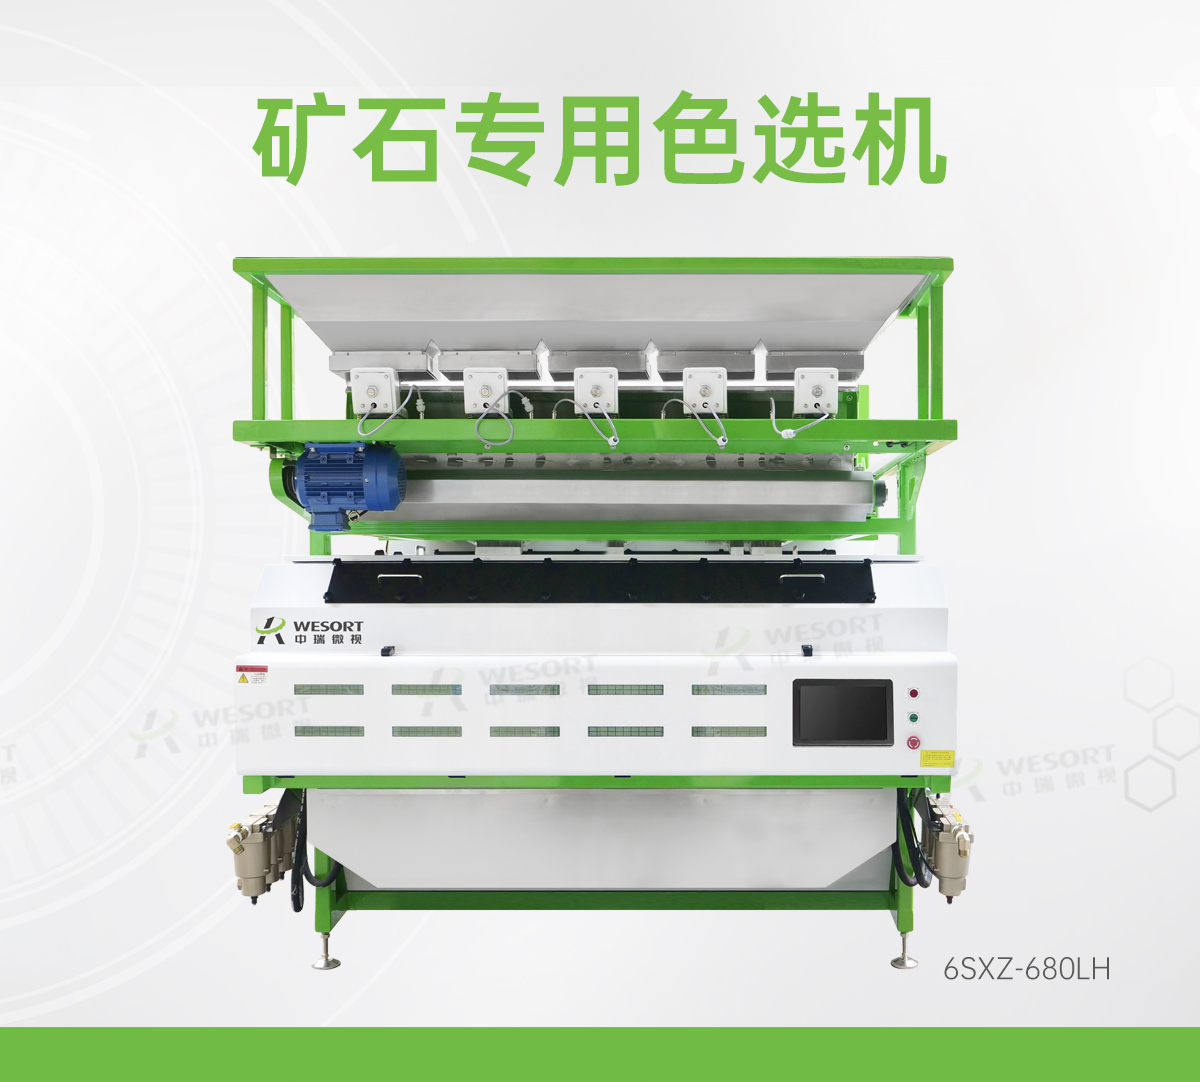 Zhongrui Micro Vision Slag Glass Color Sorting Machine AI Intelligent Sorting Ultra Clear Recognition Sorting Effect Good, Large Output